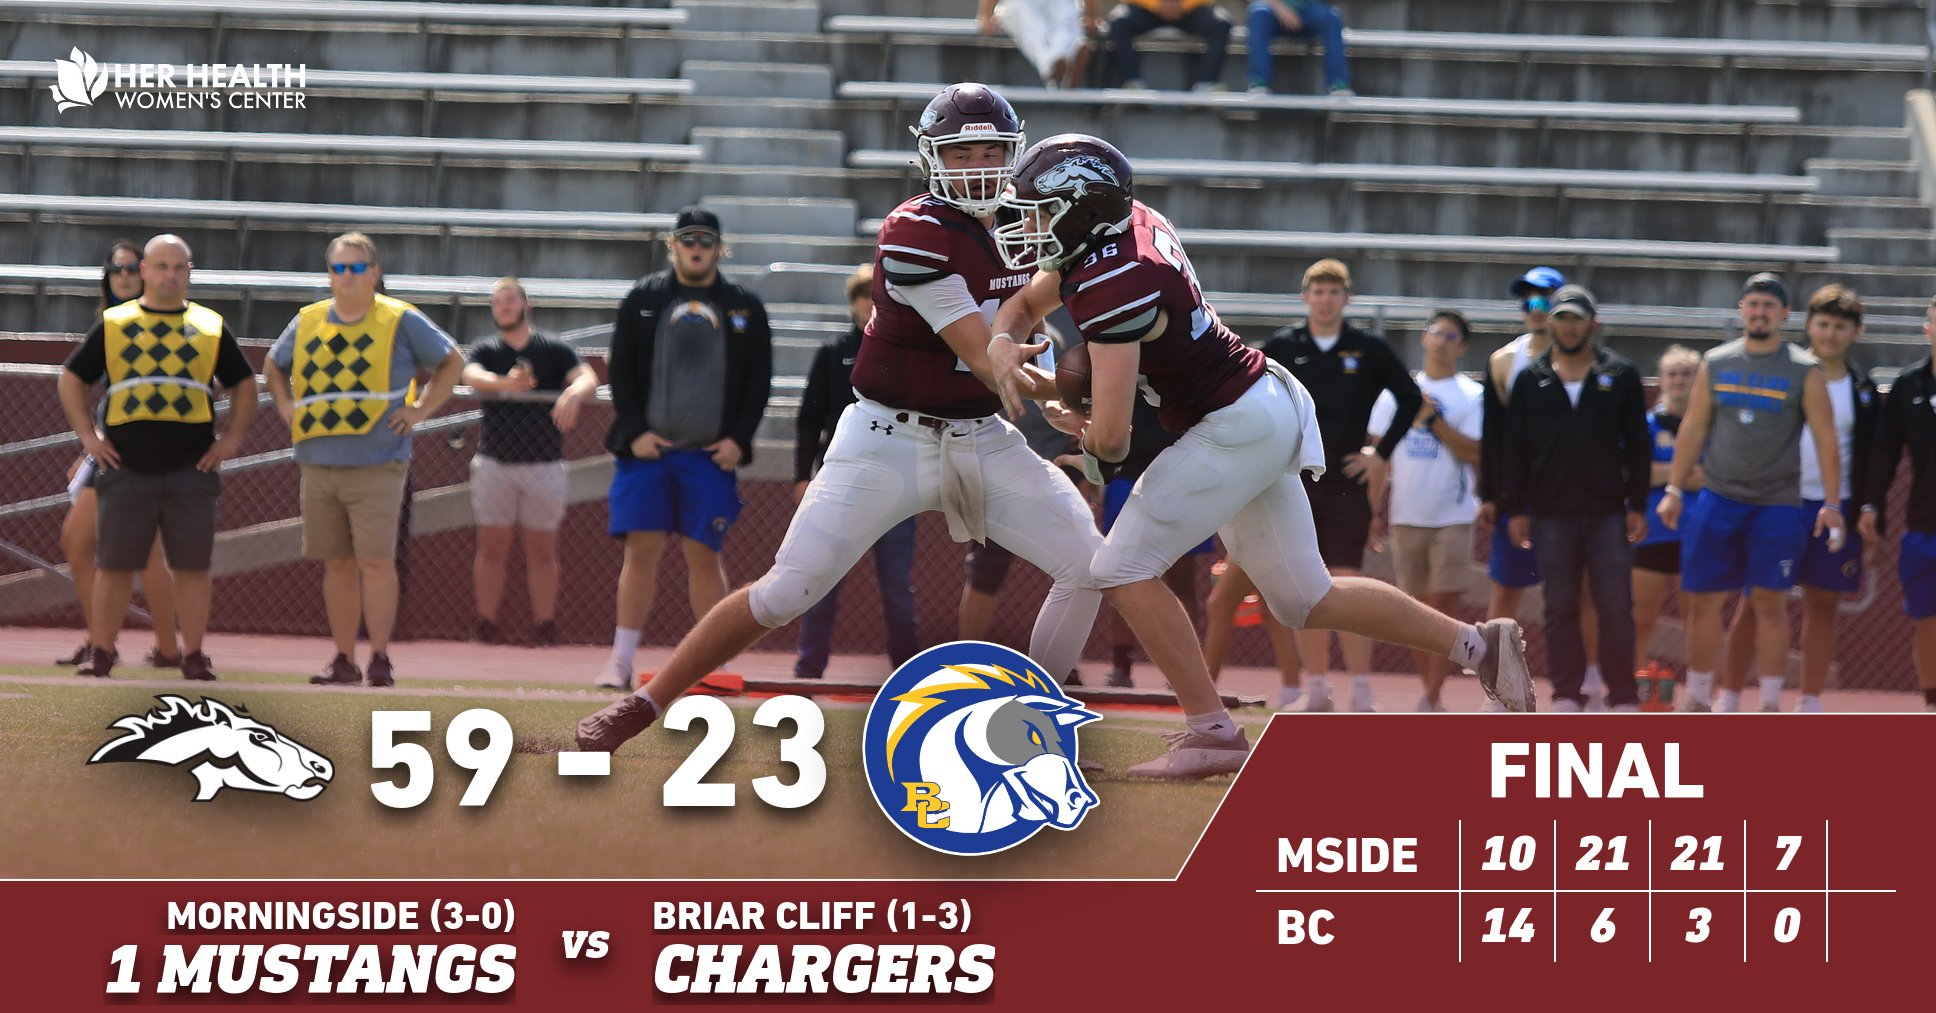 Ryan Cole takes the ball from Joe Dolincheck in Morningside's 59-23 victory over Briar Cliff.